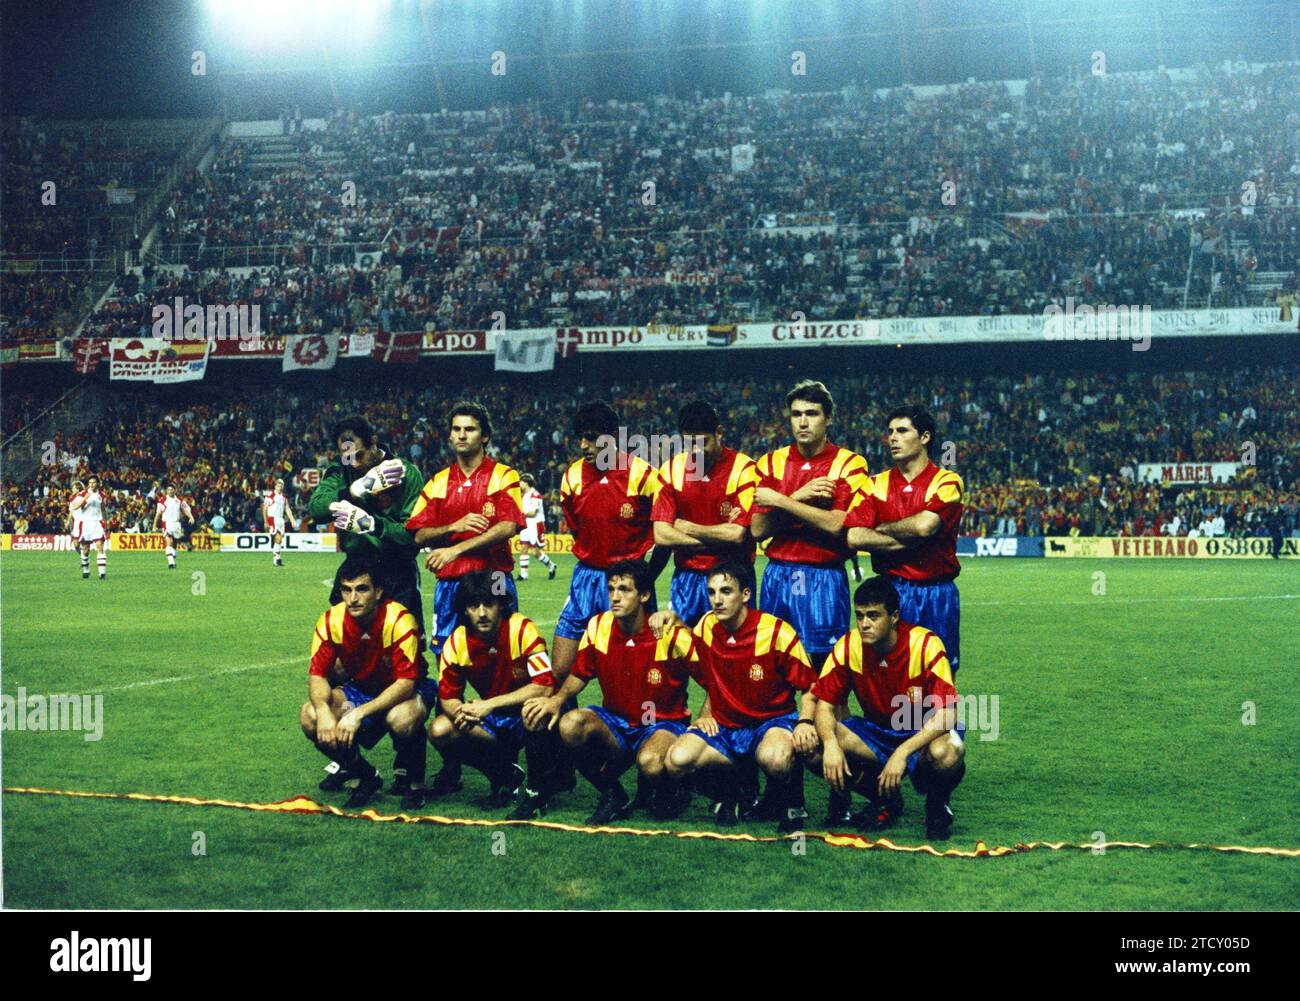 11/16/1993. Spain, to the World Cup after defeating Denmark 1-0 at the Sánchez Pizjuan stadium in Seville. Credit: Album / Archivo ABC / Miguel Berrocal Stock Photo